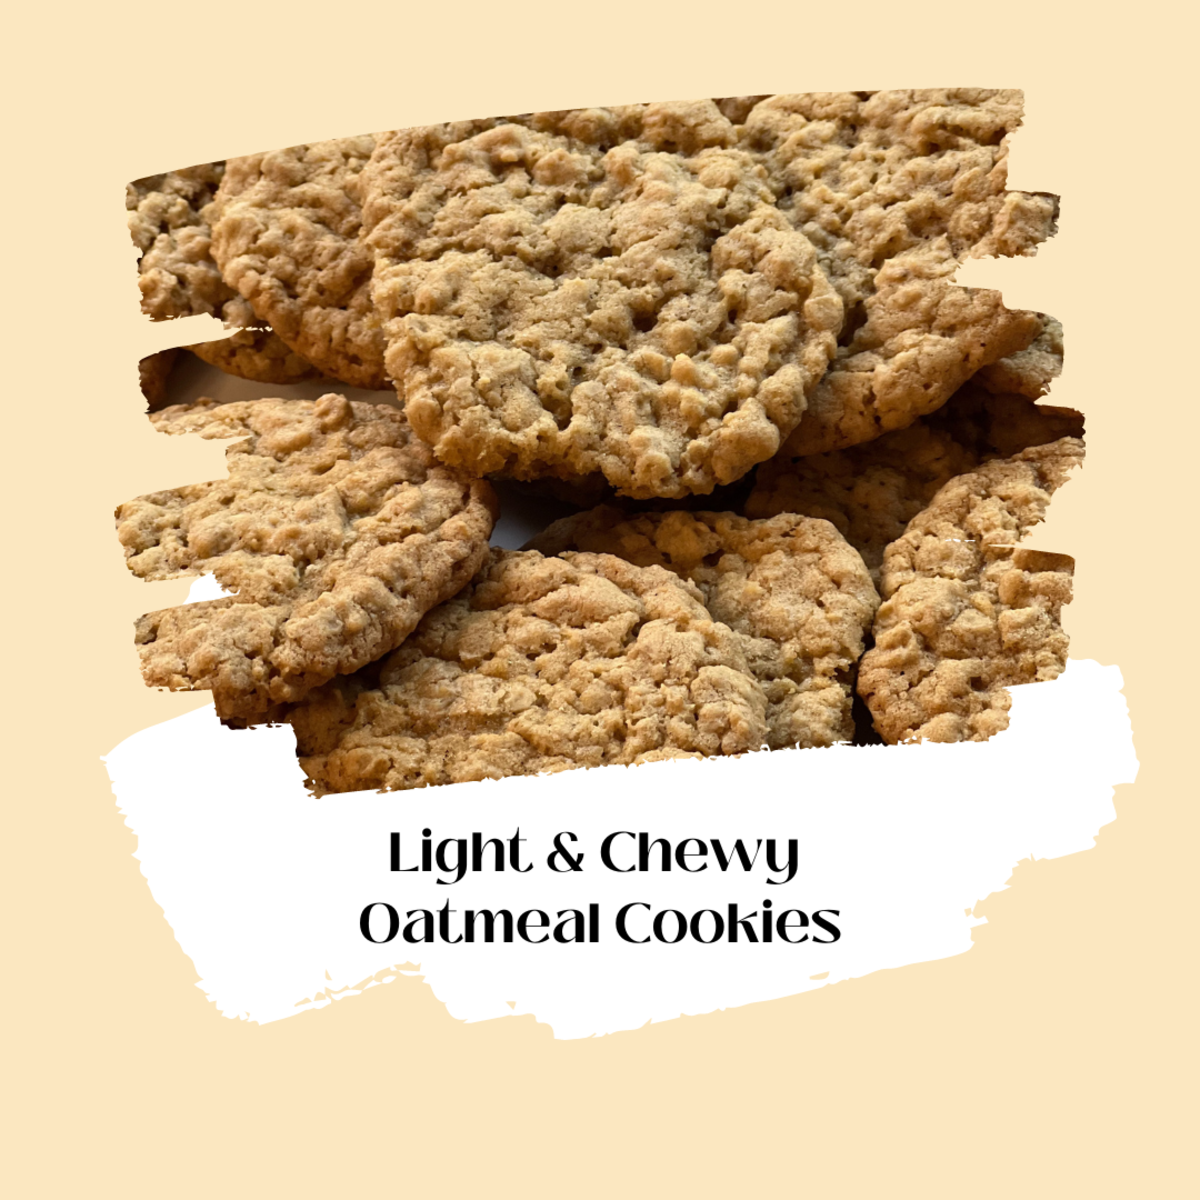 Light & Chewy Oatmeal Cookies